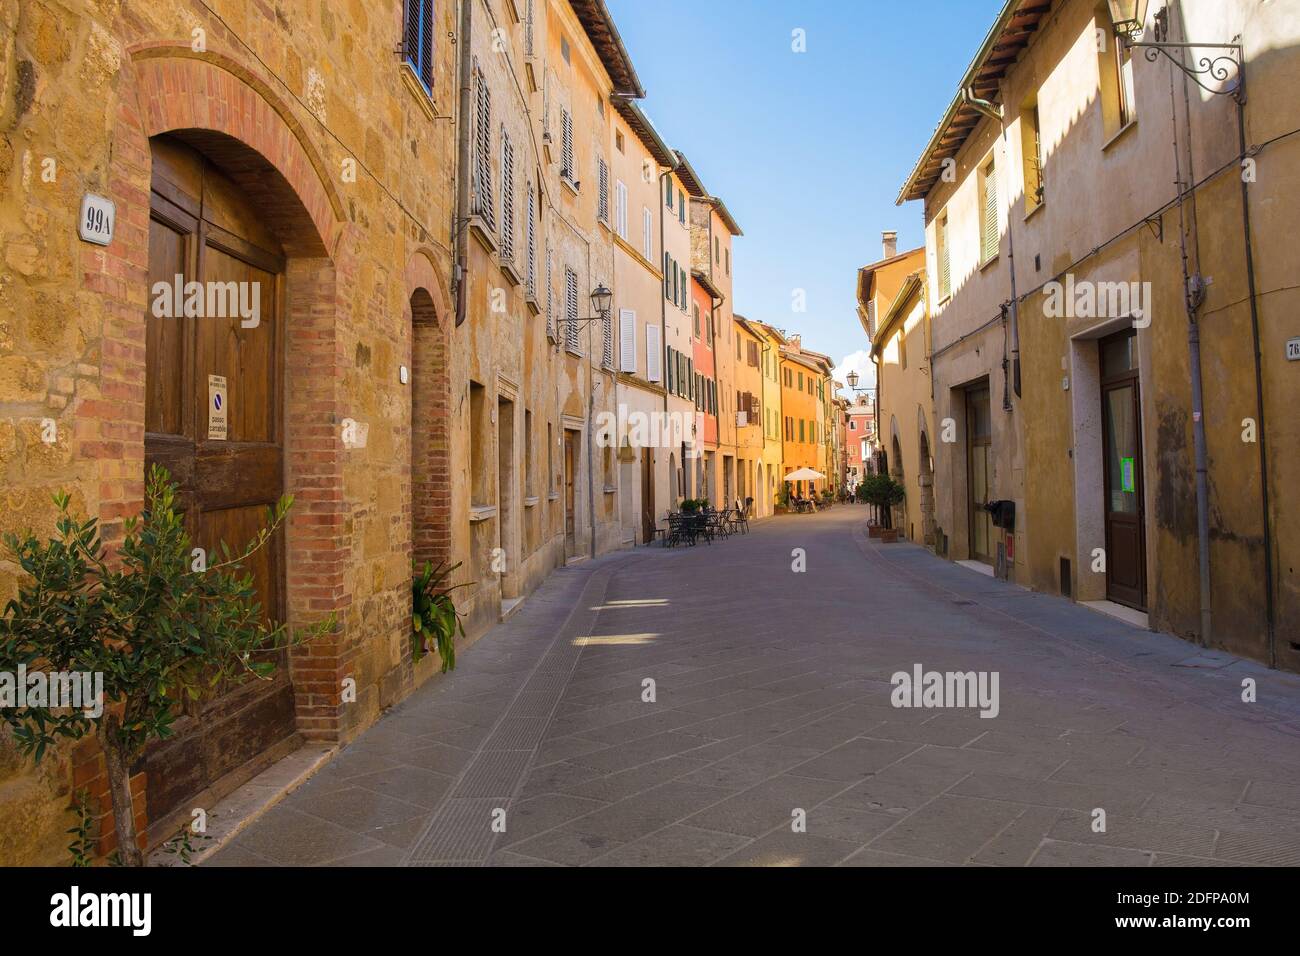 San Quirico D'Orcia, Italy - September 3rd 2020. A residential road with several bars in the historic medieval village of San Quirico D'Orcia, Siena P Stock Photo